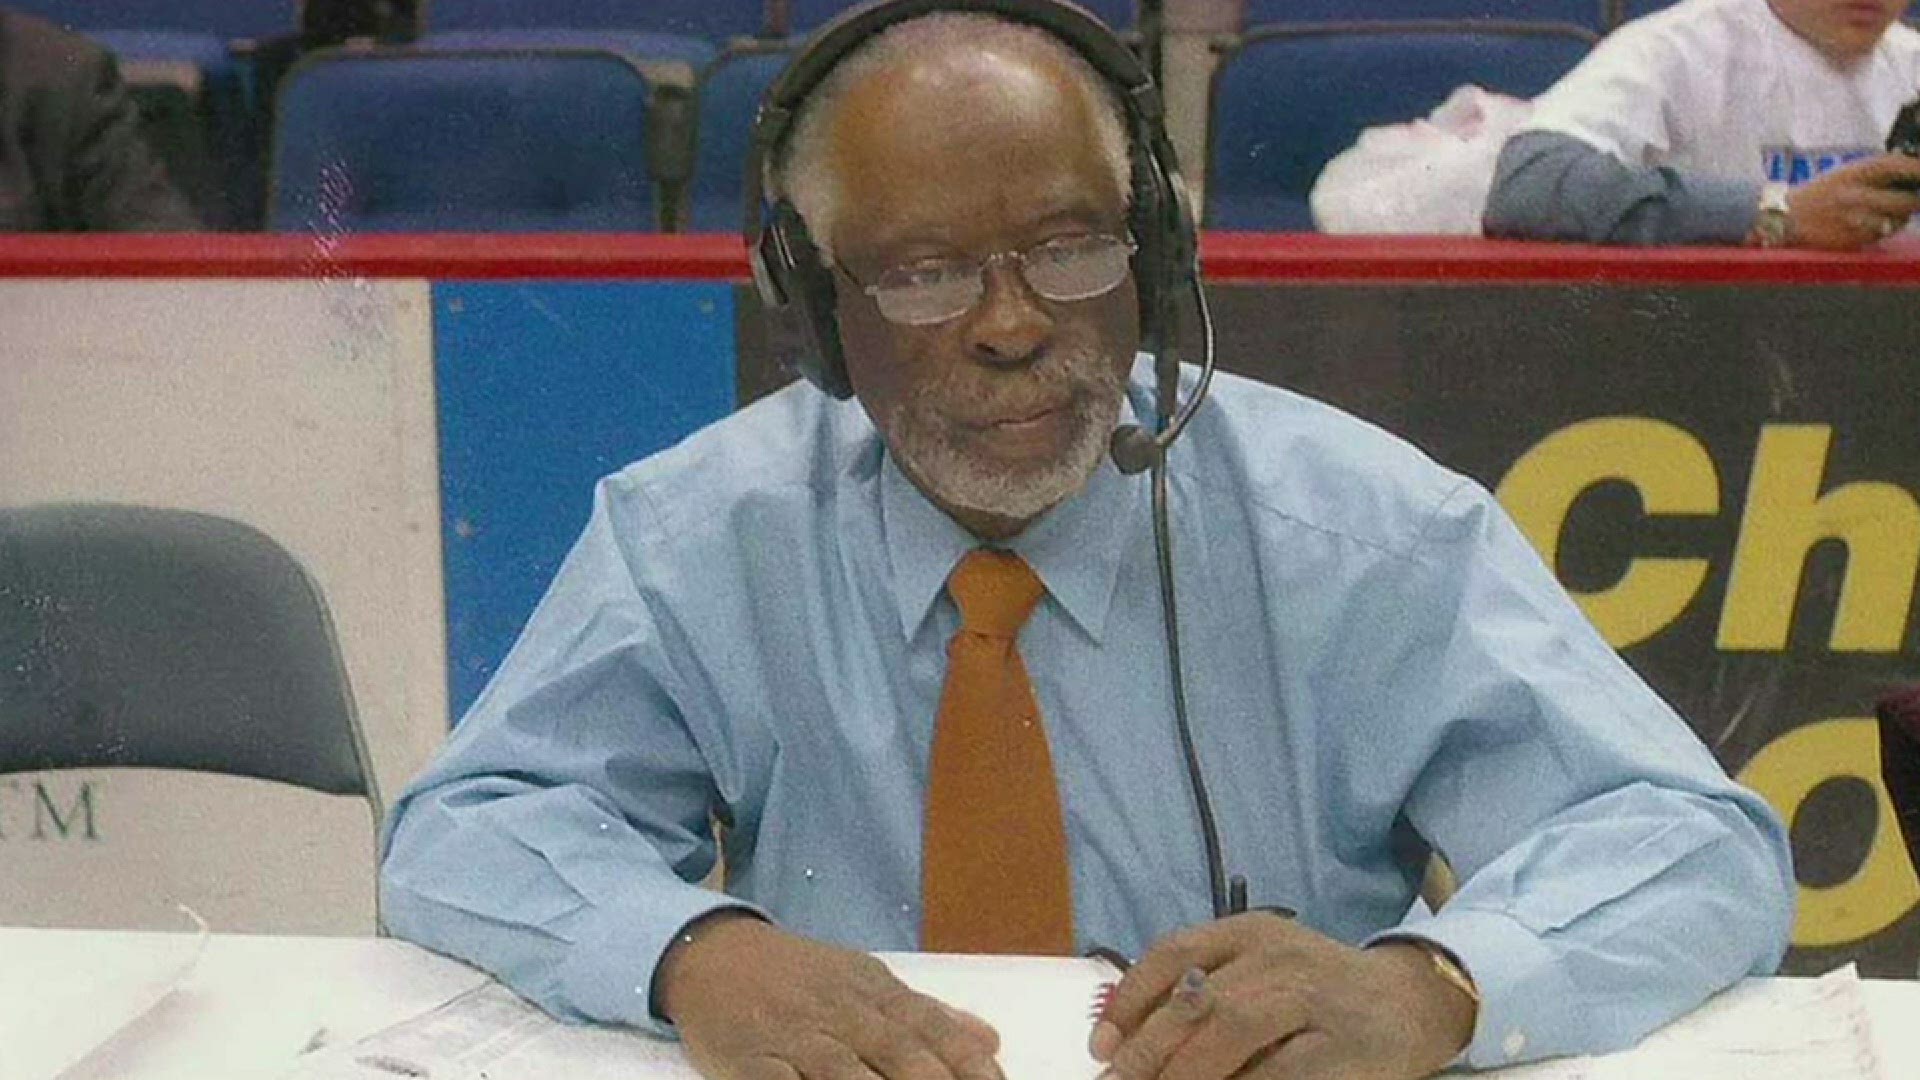 Pinkney was the first African-American to work as a play-by-play announcer on a major television network. He lived in Hampton at the end of his life.